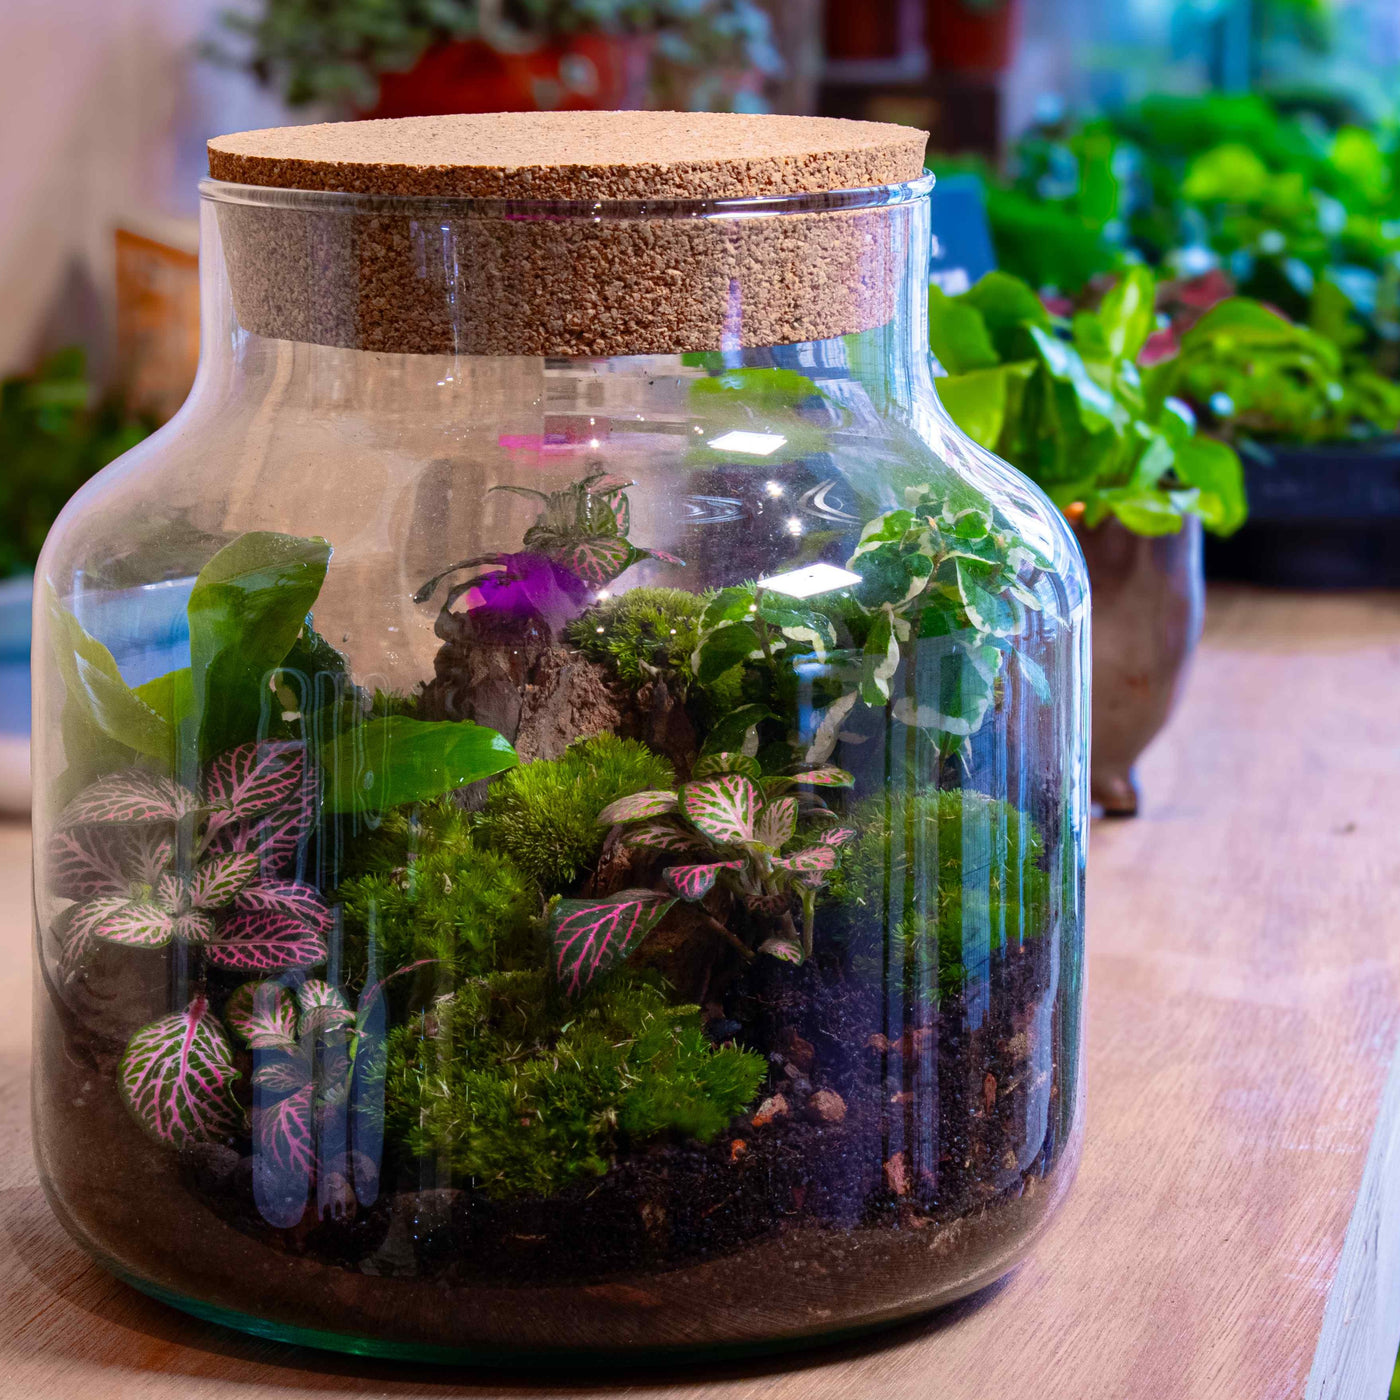 Classic terrarium kit: A perfect gift for plant lovers.